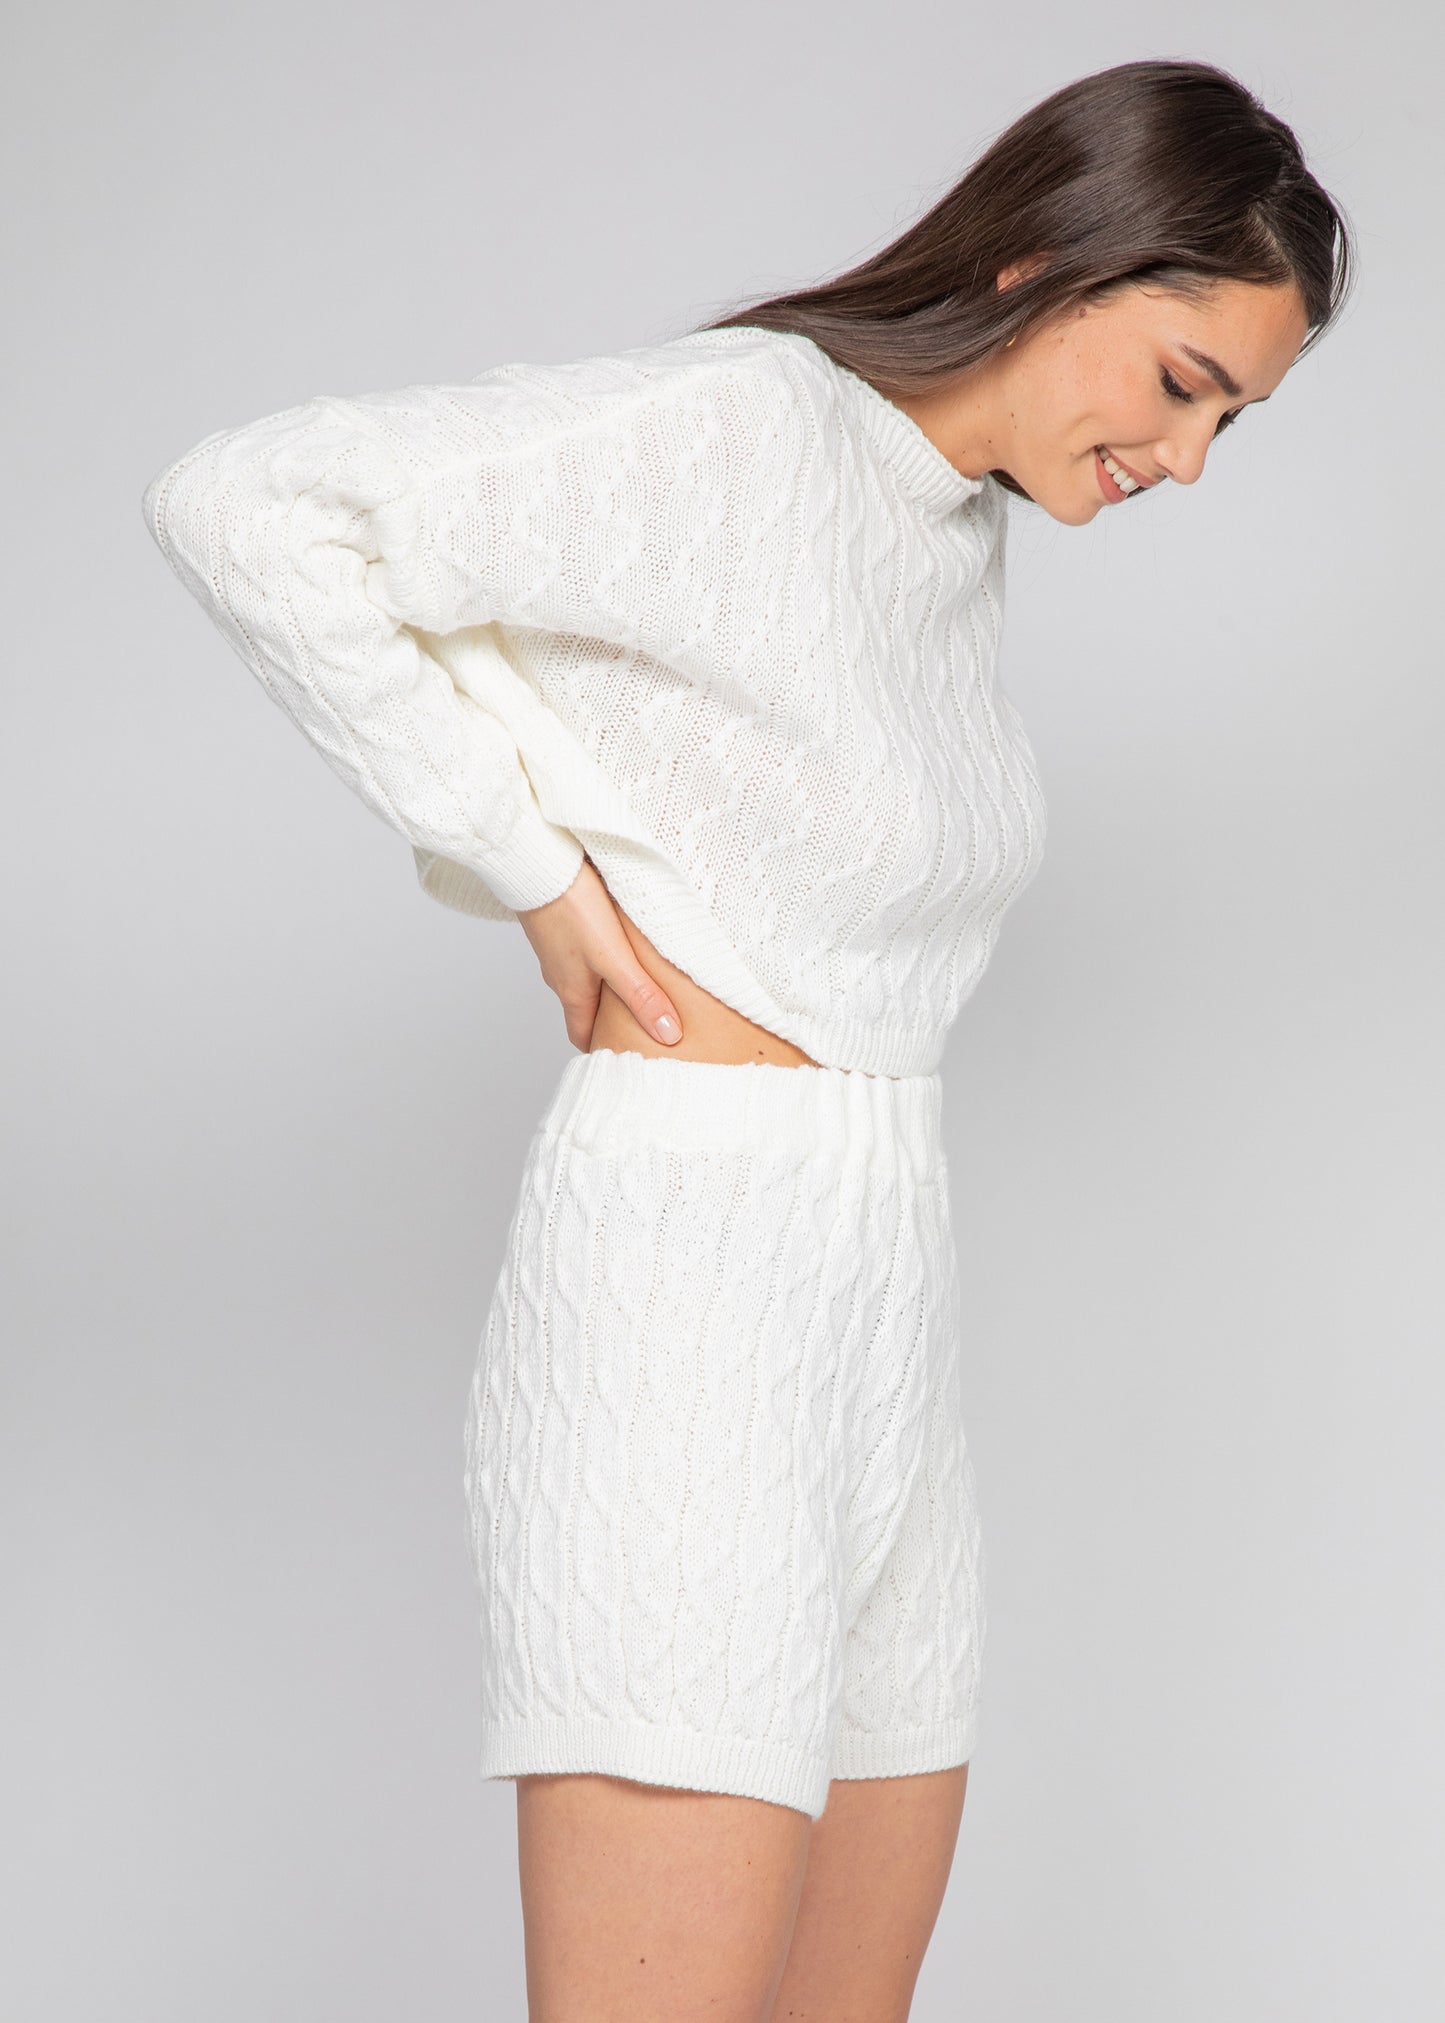 Cable knit jumper and shorts co-ord in white